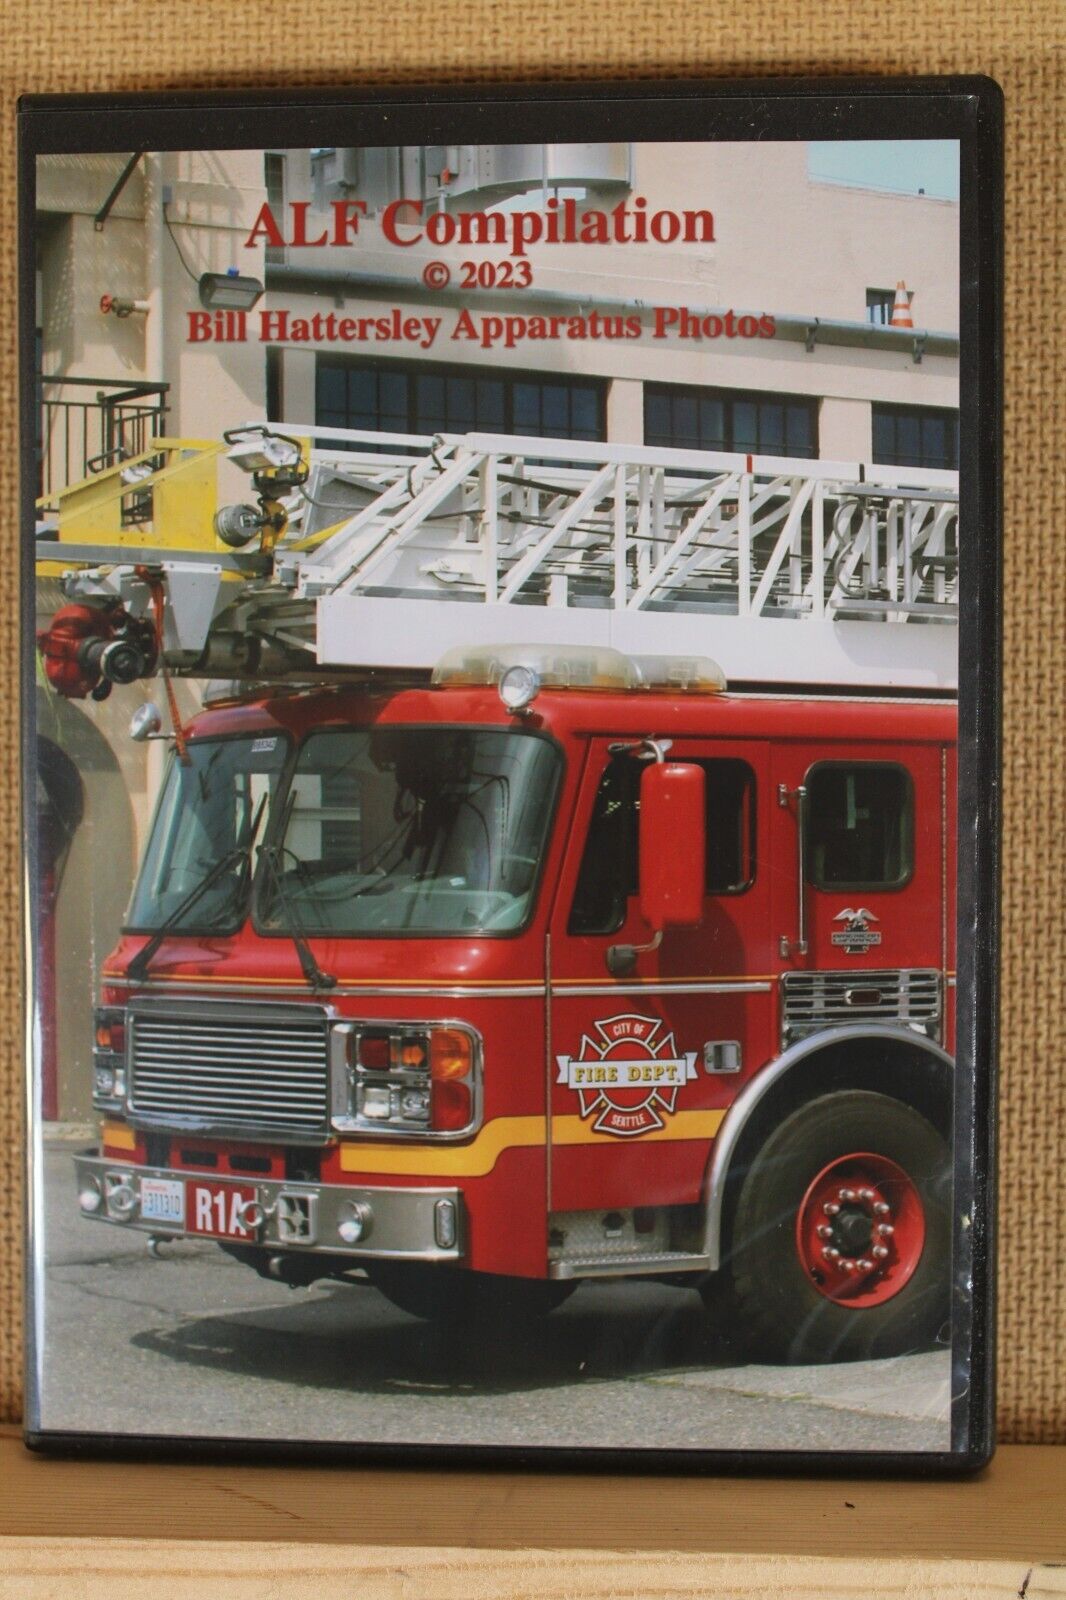 NEW-ALF Fire Apparatus Photos on FLASH-DRIVE-385 rig images from the West